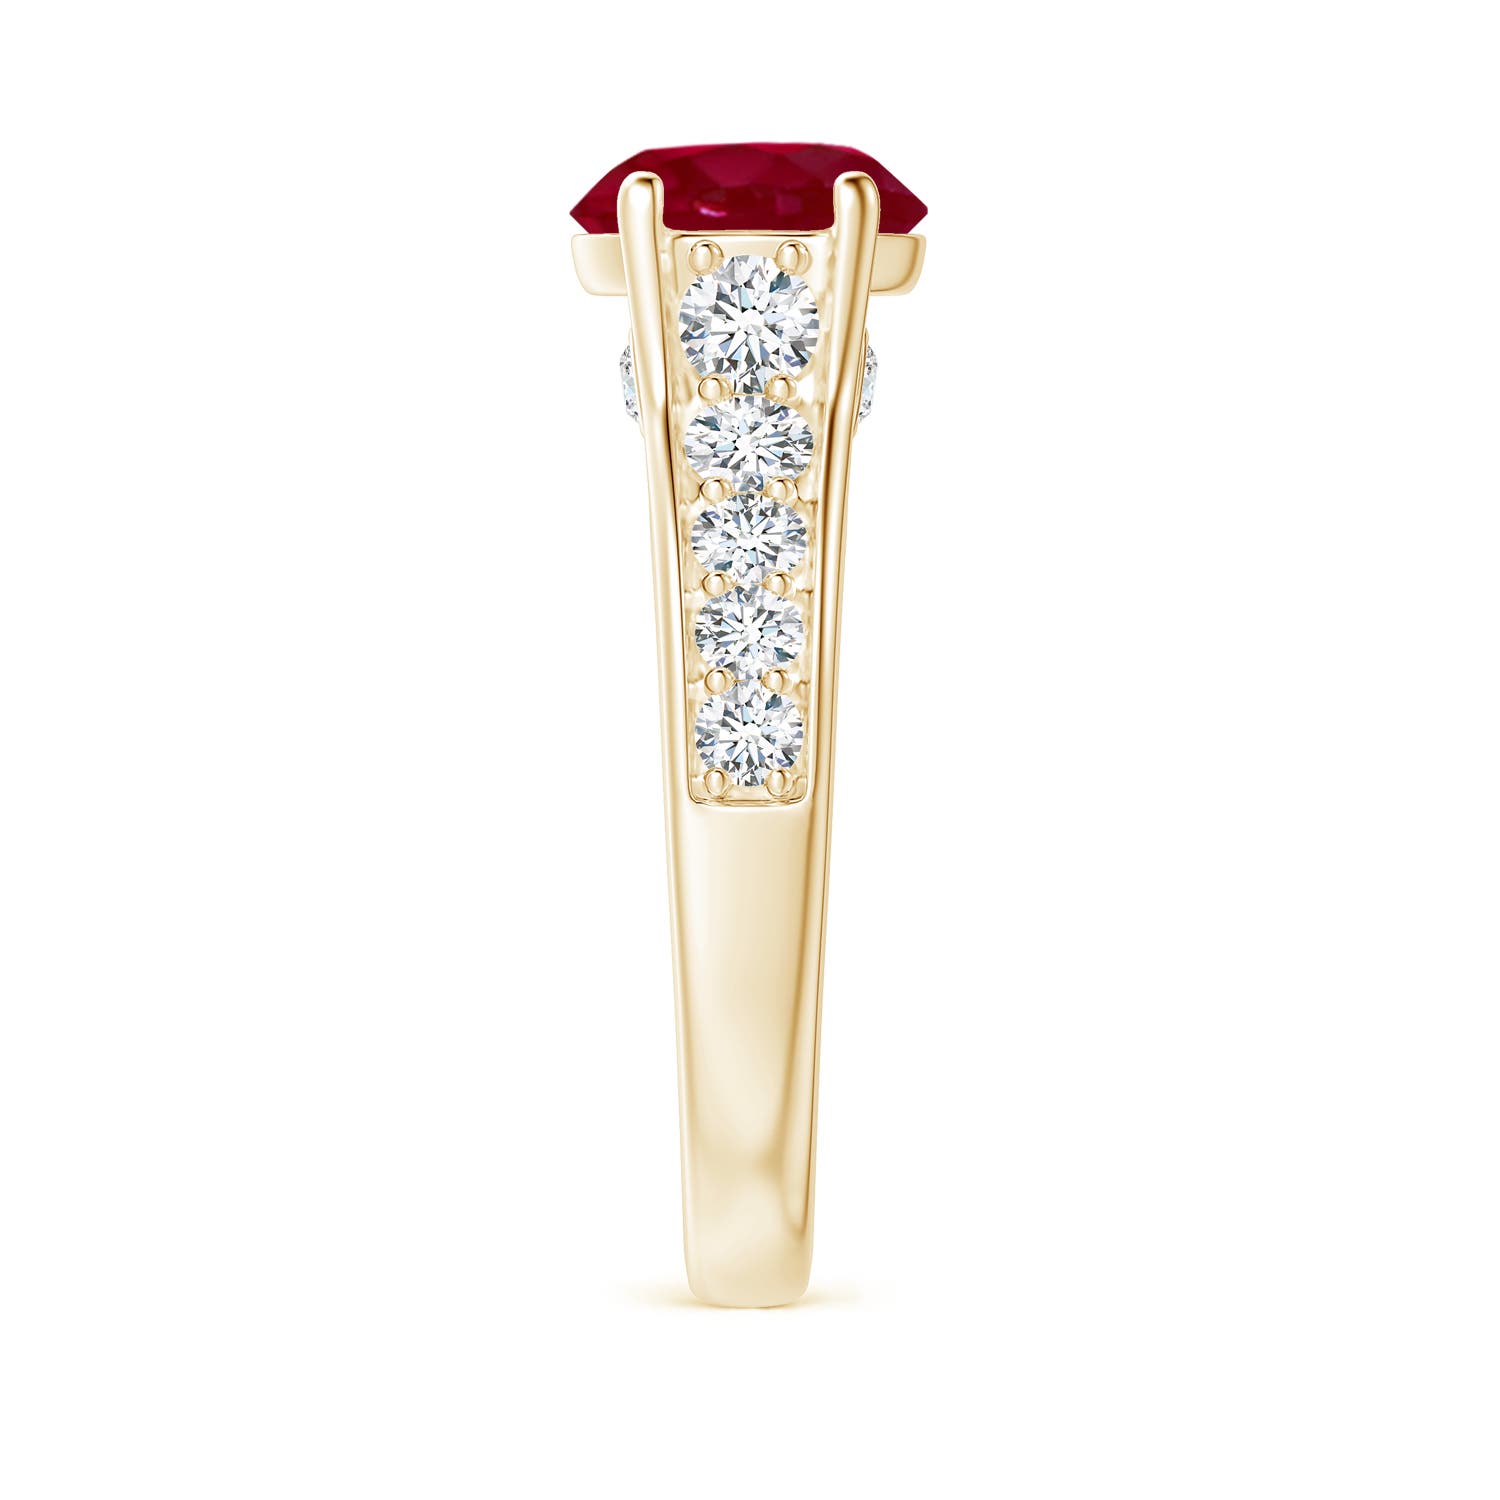 AA - Ruby / 2.8 CT / 14 KT Yellow Gold